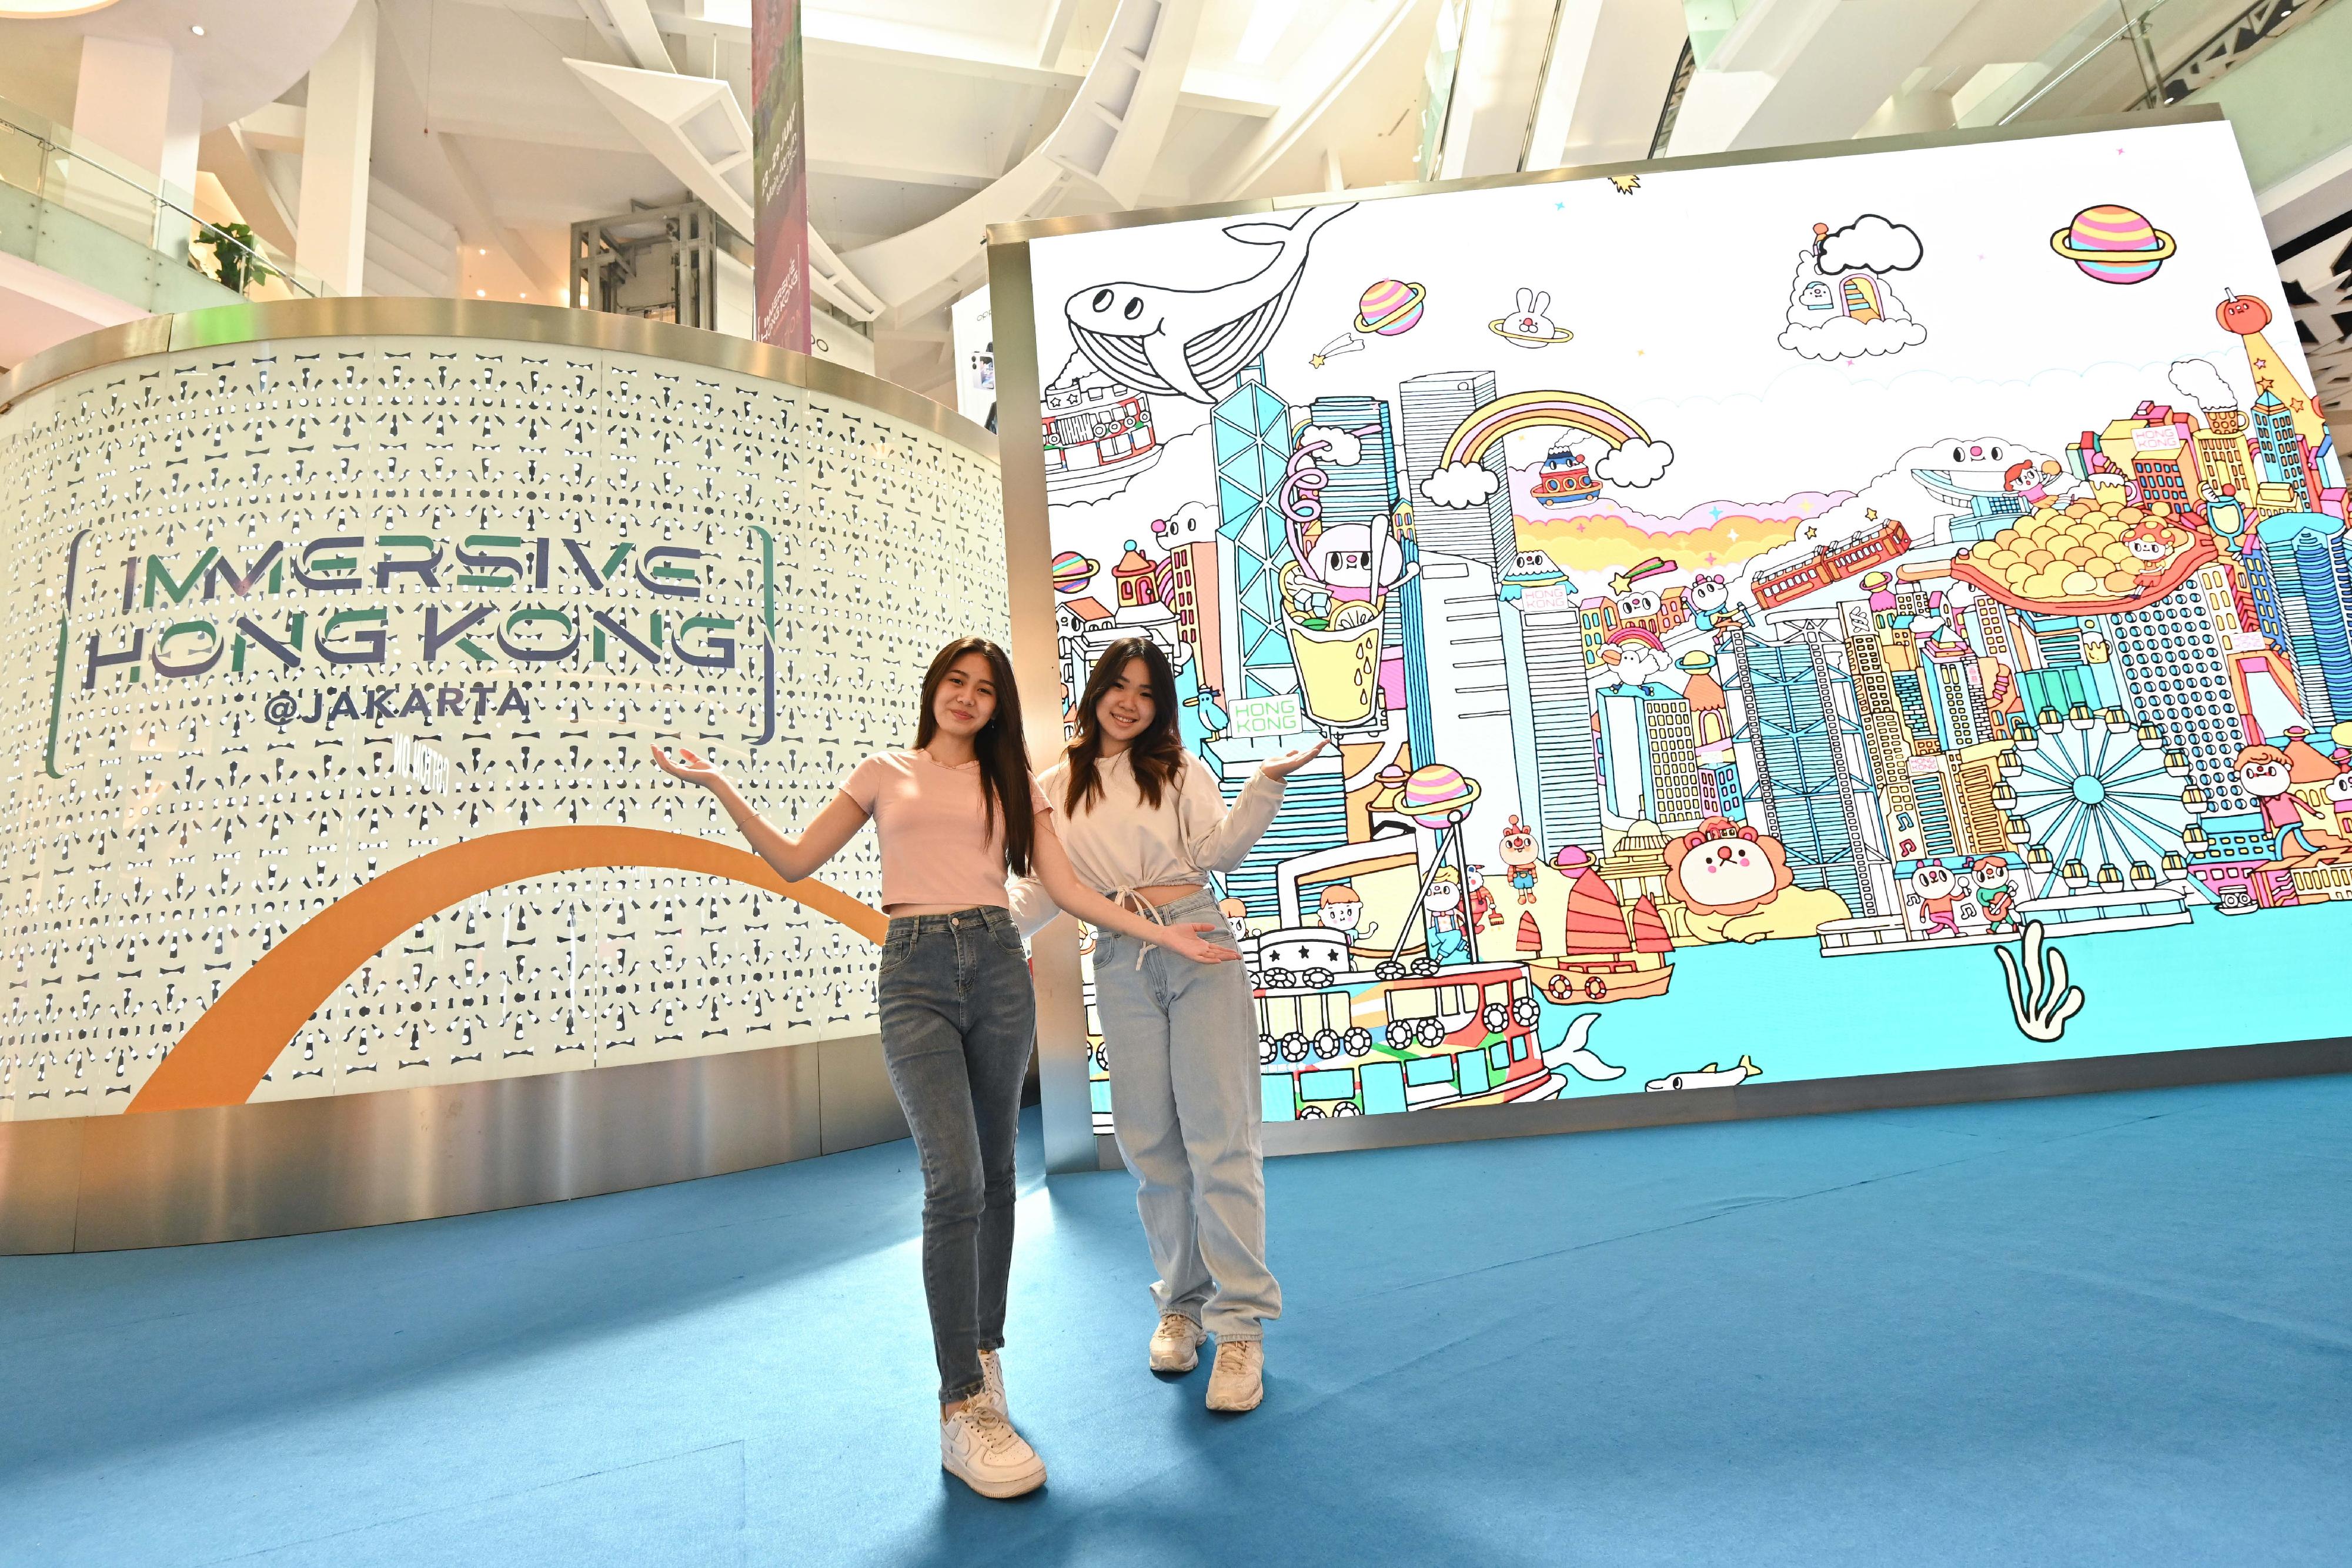 The "Immersive Hong Kong" roving exhibition, which showcases Hong Kong's unique strengths, advantages and opportunities with art technology, was launched in Jakarta, Indonesia, today (July 23) as part of a promotional campaign in Association of Southeast Asian Nations.